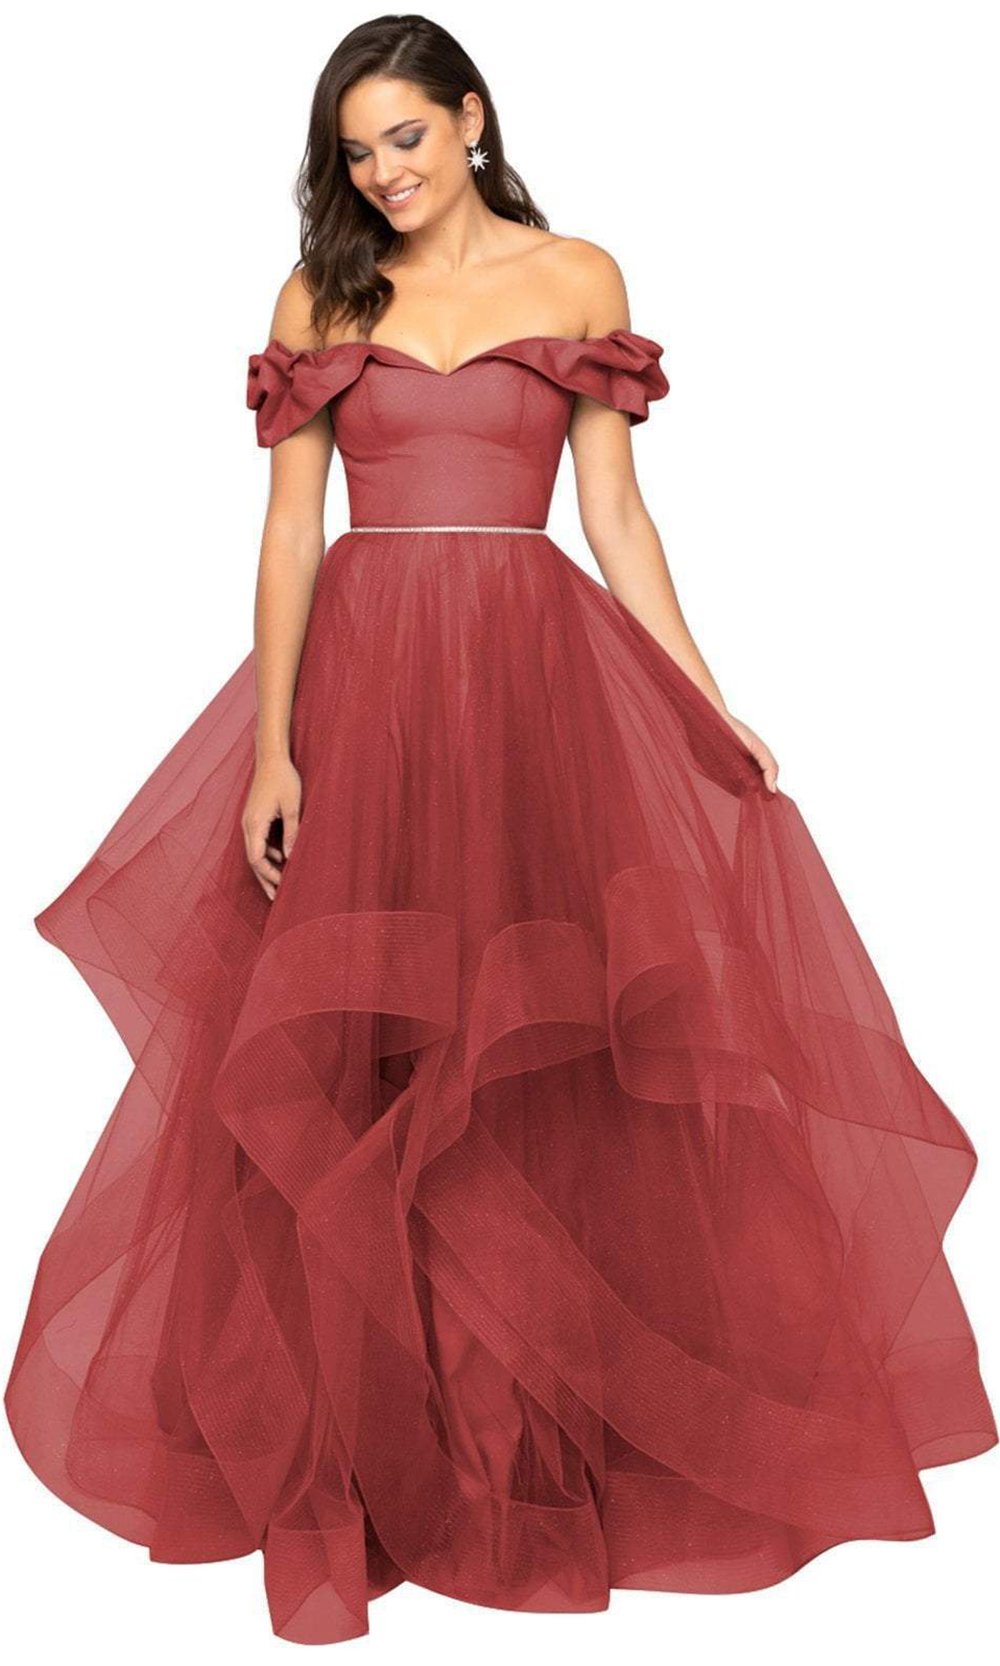 Terani Couture - Ruffled Off-Shoulder Tulle Ballgown 1911P8542 In Red